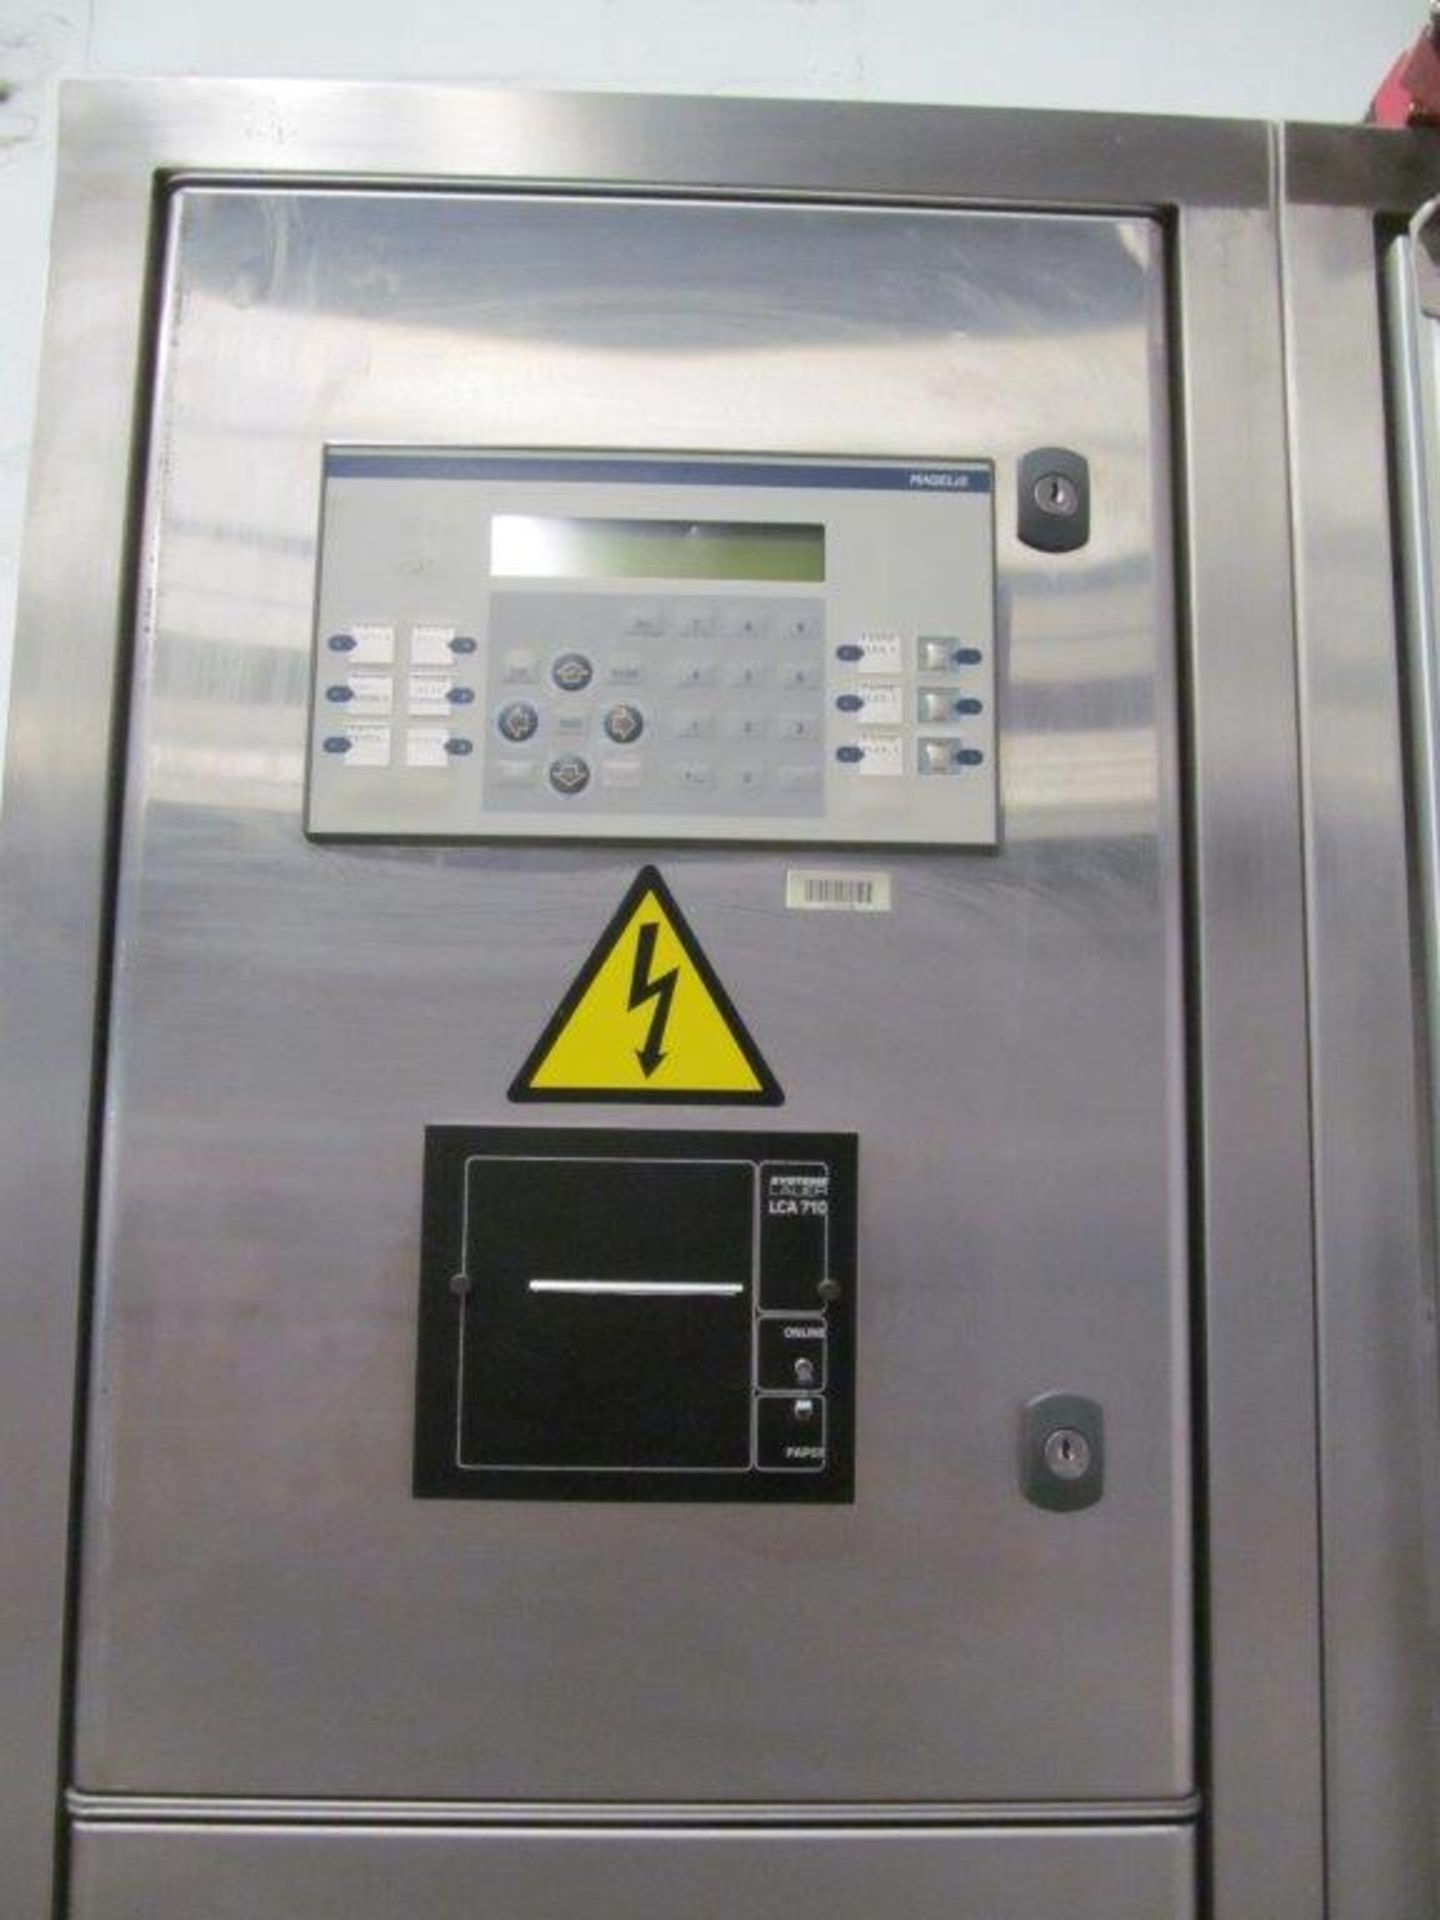 SOLERI THERMAL DESINFECTION CABINET, 200 HOURS,YEAR: 1999, 170 VOLTS, DIMENSION: 4X3X8, WEIGHT: - Image 5 of 6